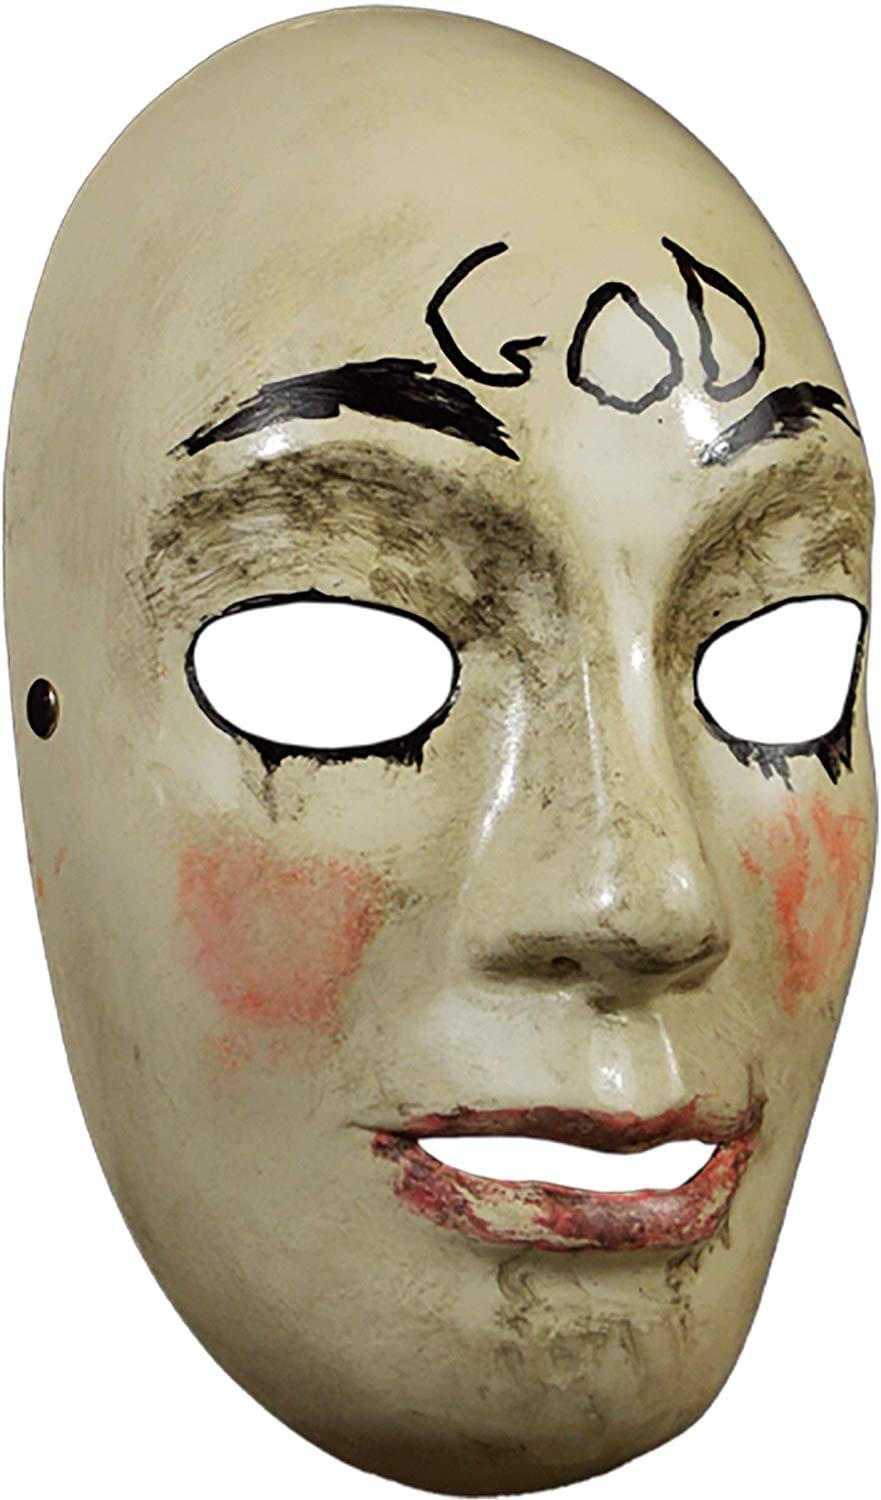 The Purge Anarchy God Adult Injection Mask